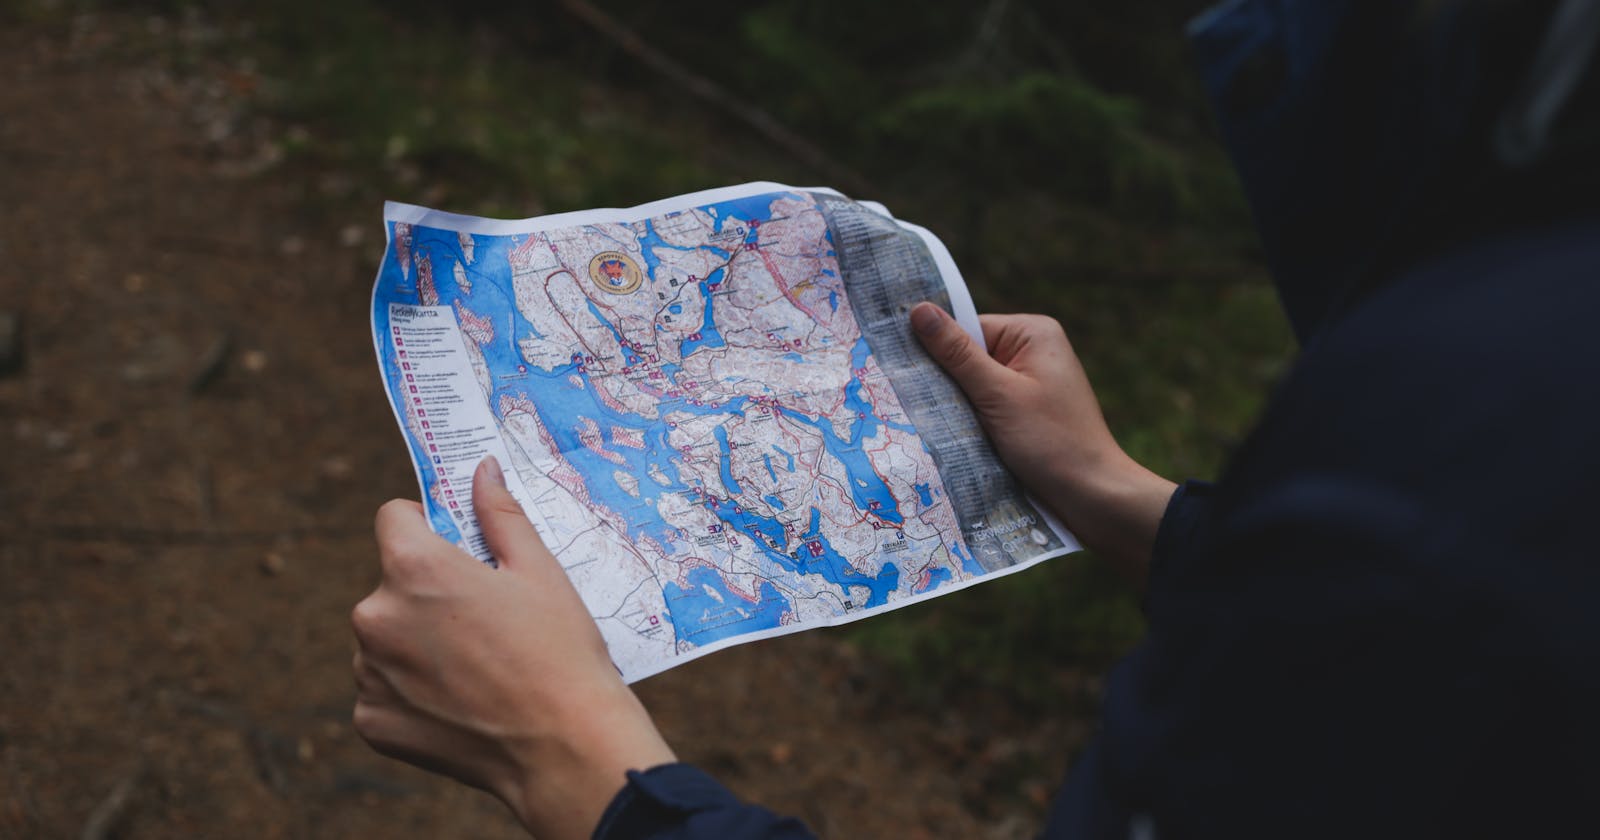 Grab your map(); adventure is out there!